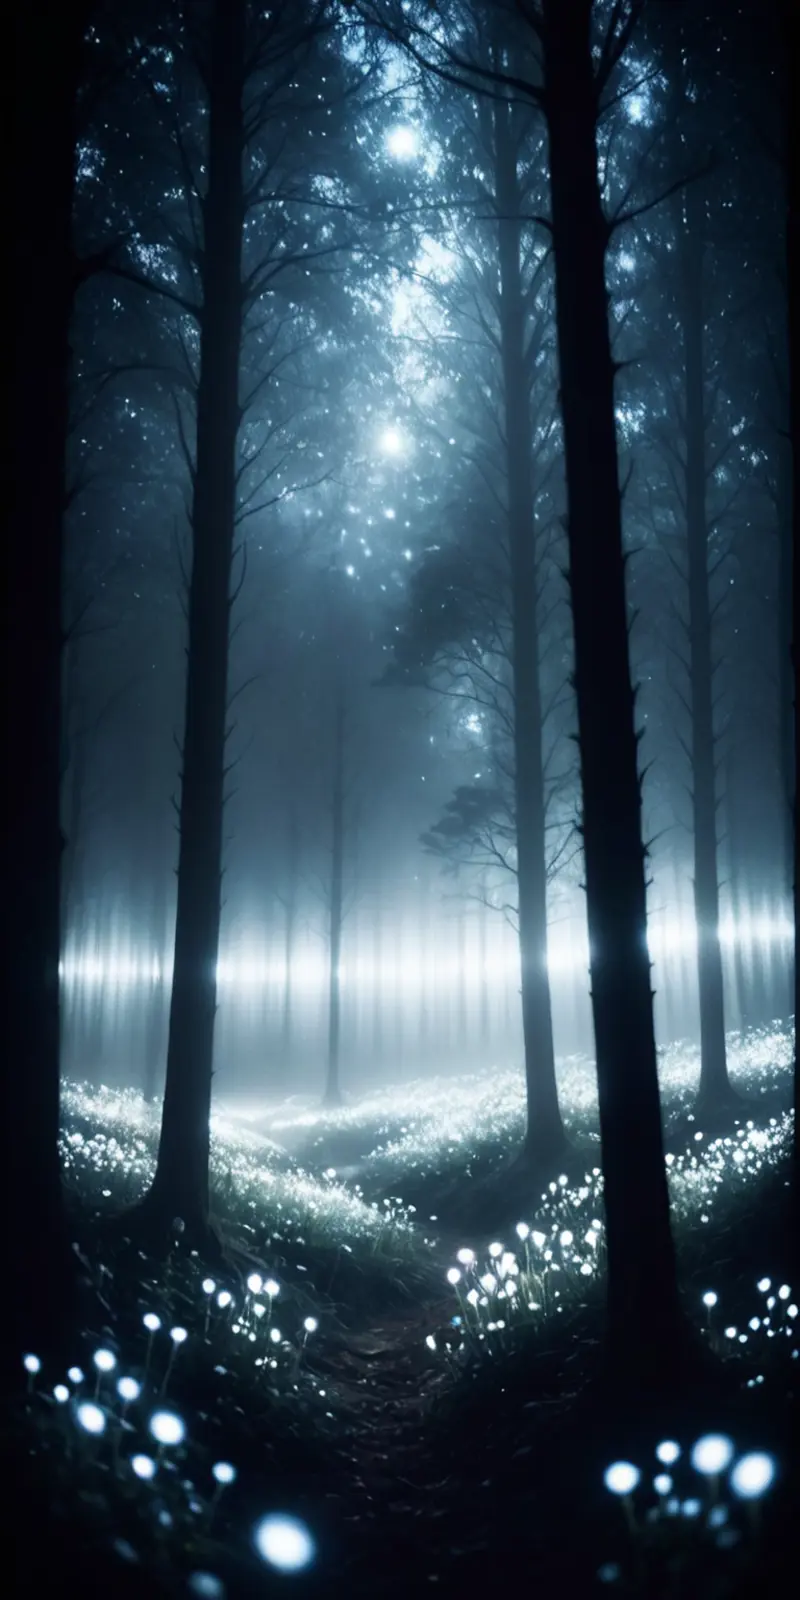 A dense, foggy forest bathed in an ethereal light emanating from the mysterious foliage on the ground and the spaces between the trees. The light diffuses through the fog and branches, casting an otherworldly atmosphere over the scene. 